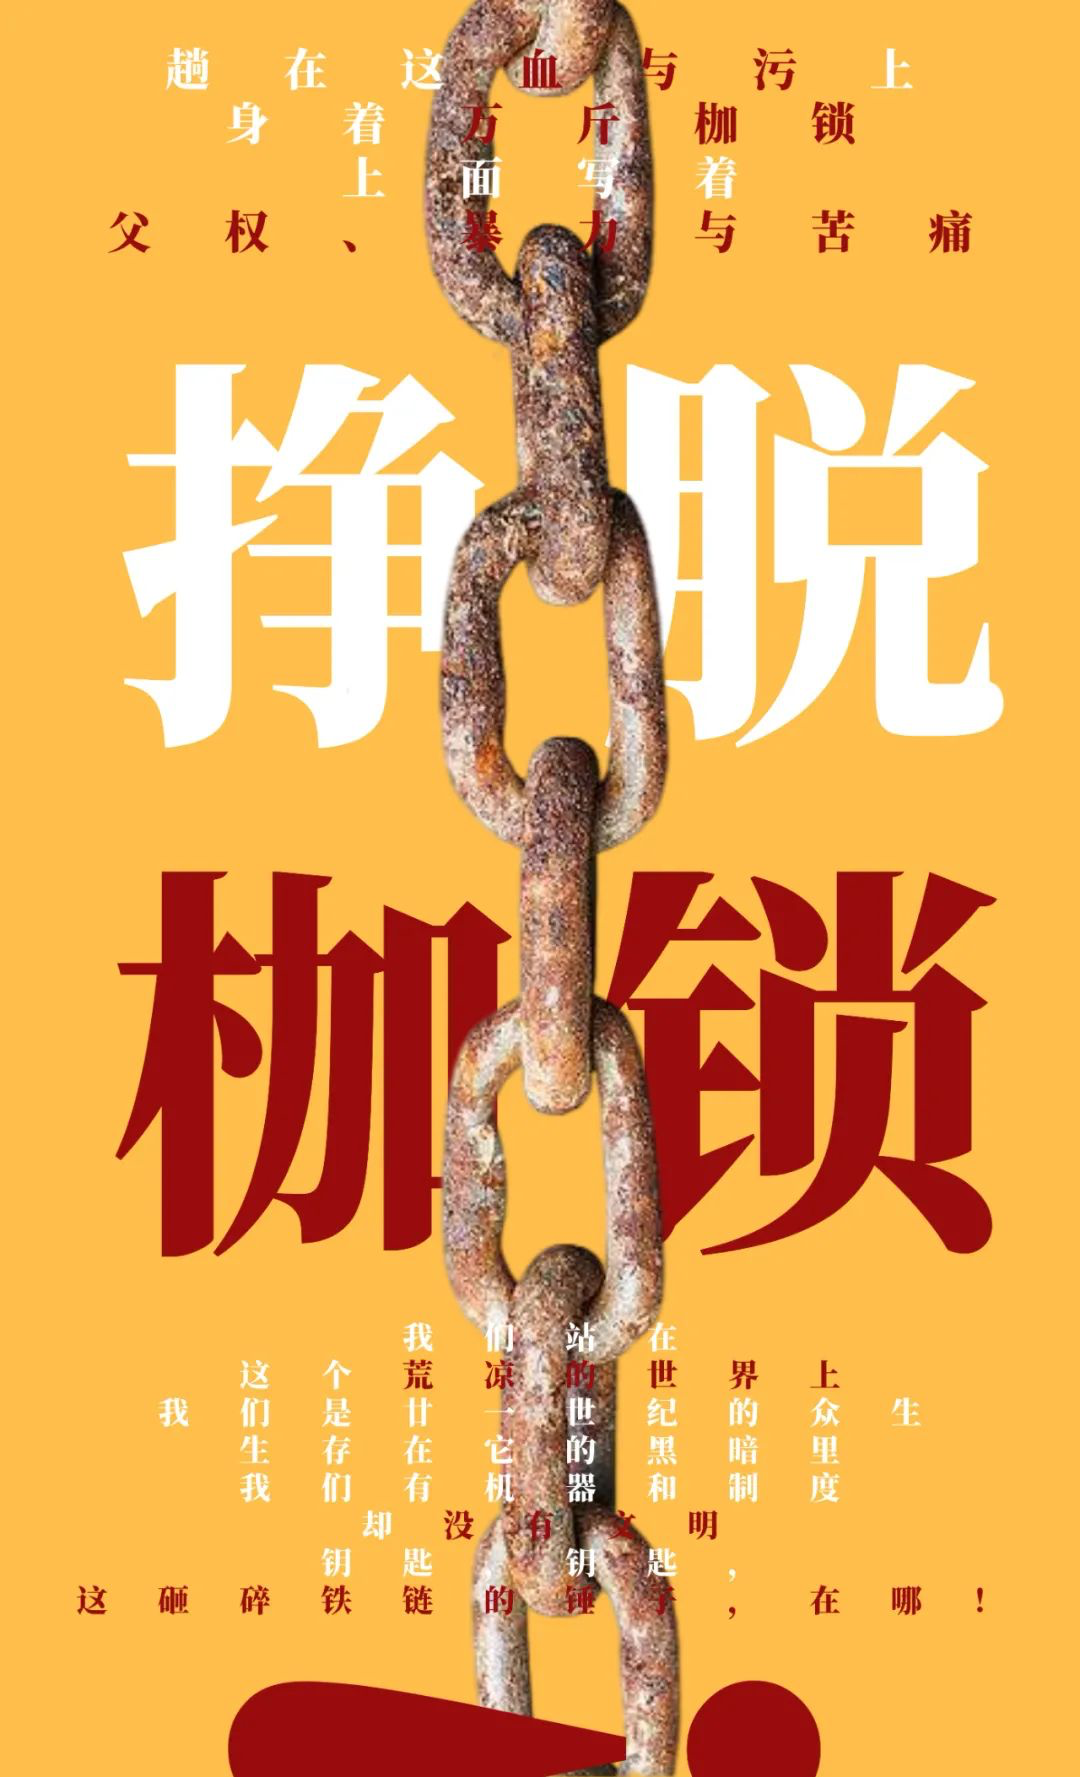 An image of a rusty chain runs vertically through the center of this yellow poster. 